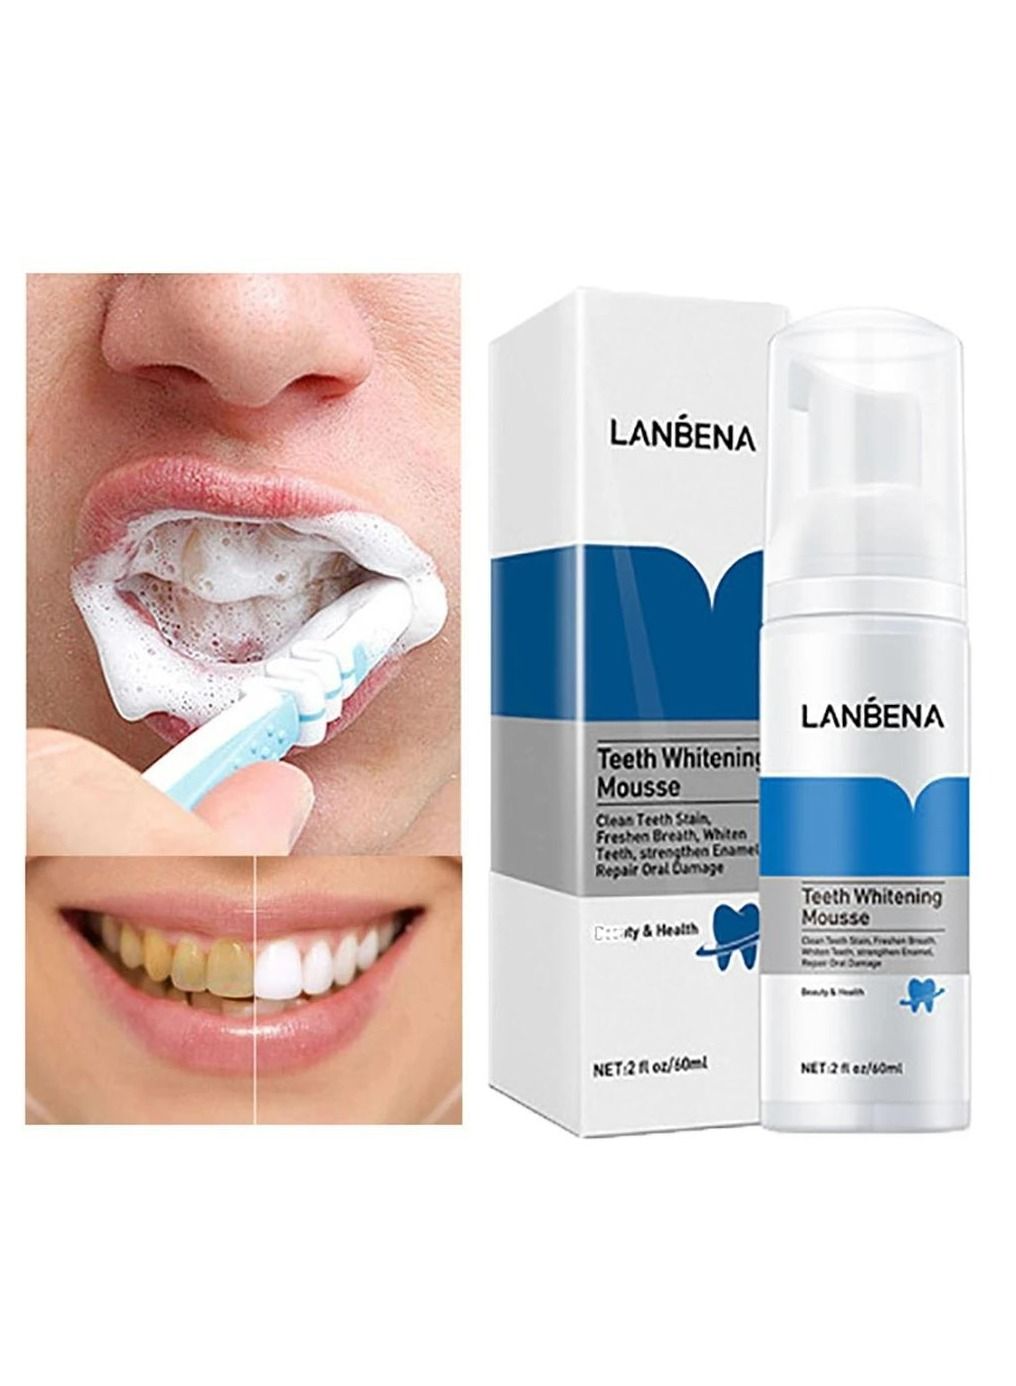 Teeth Supply Stain Remover Plaque Dental Organic Tooth Cleanser Foam Products Teeth Whitening Mousse 60ml 